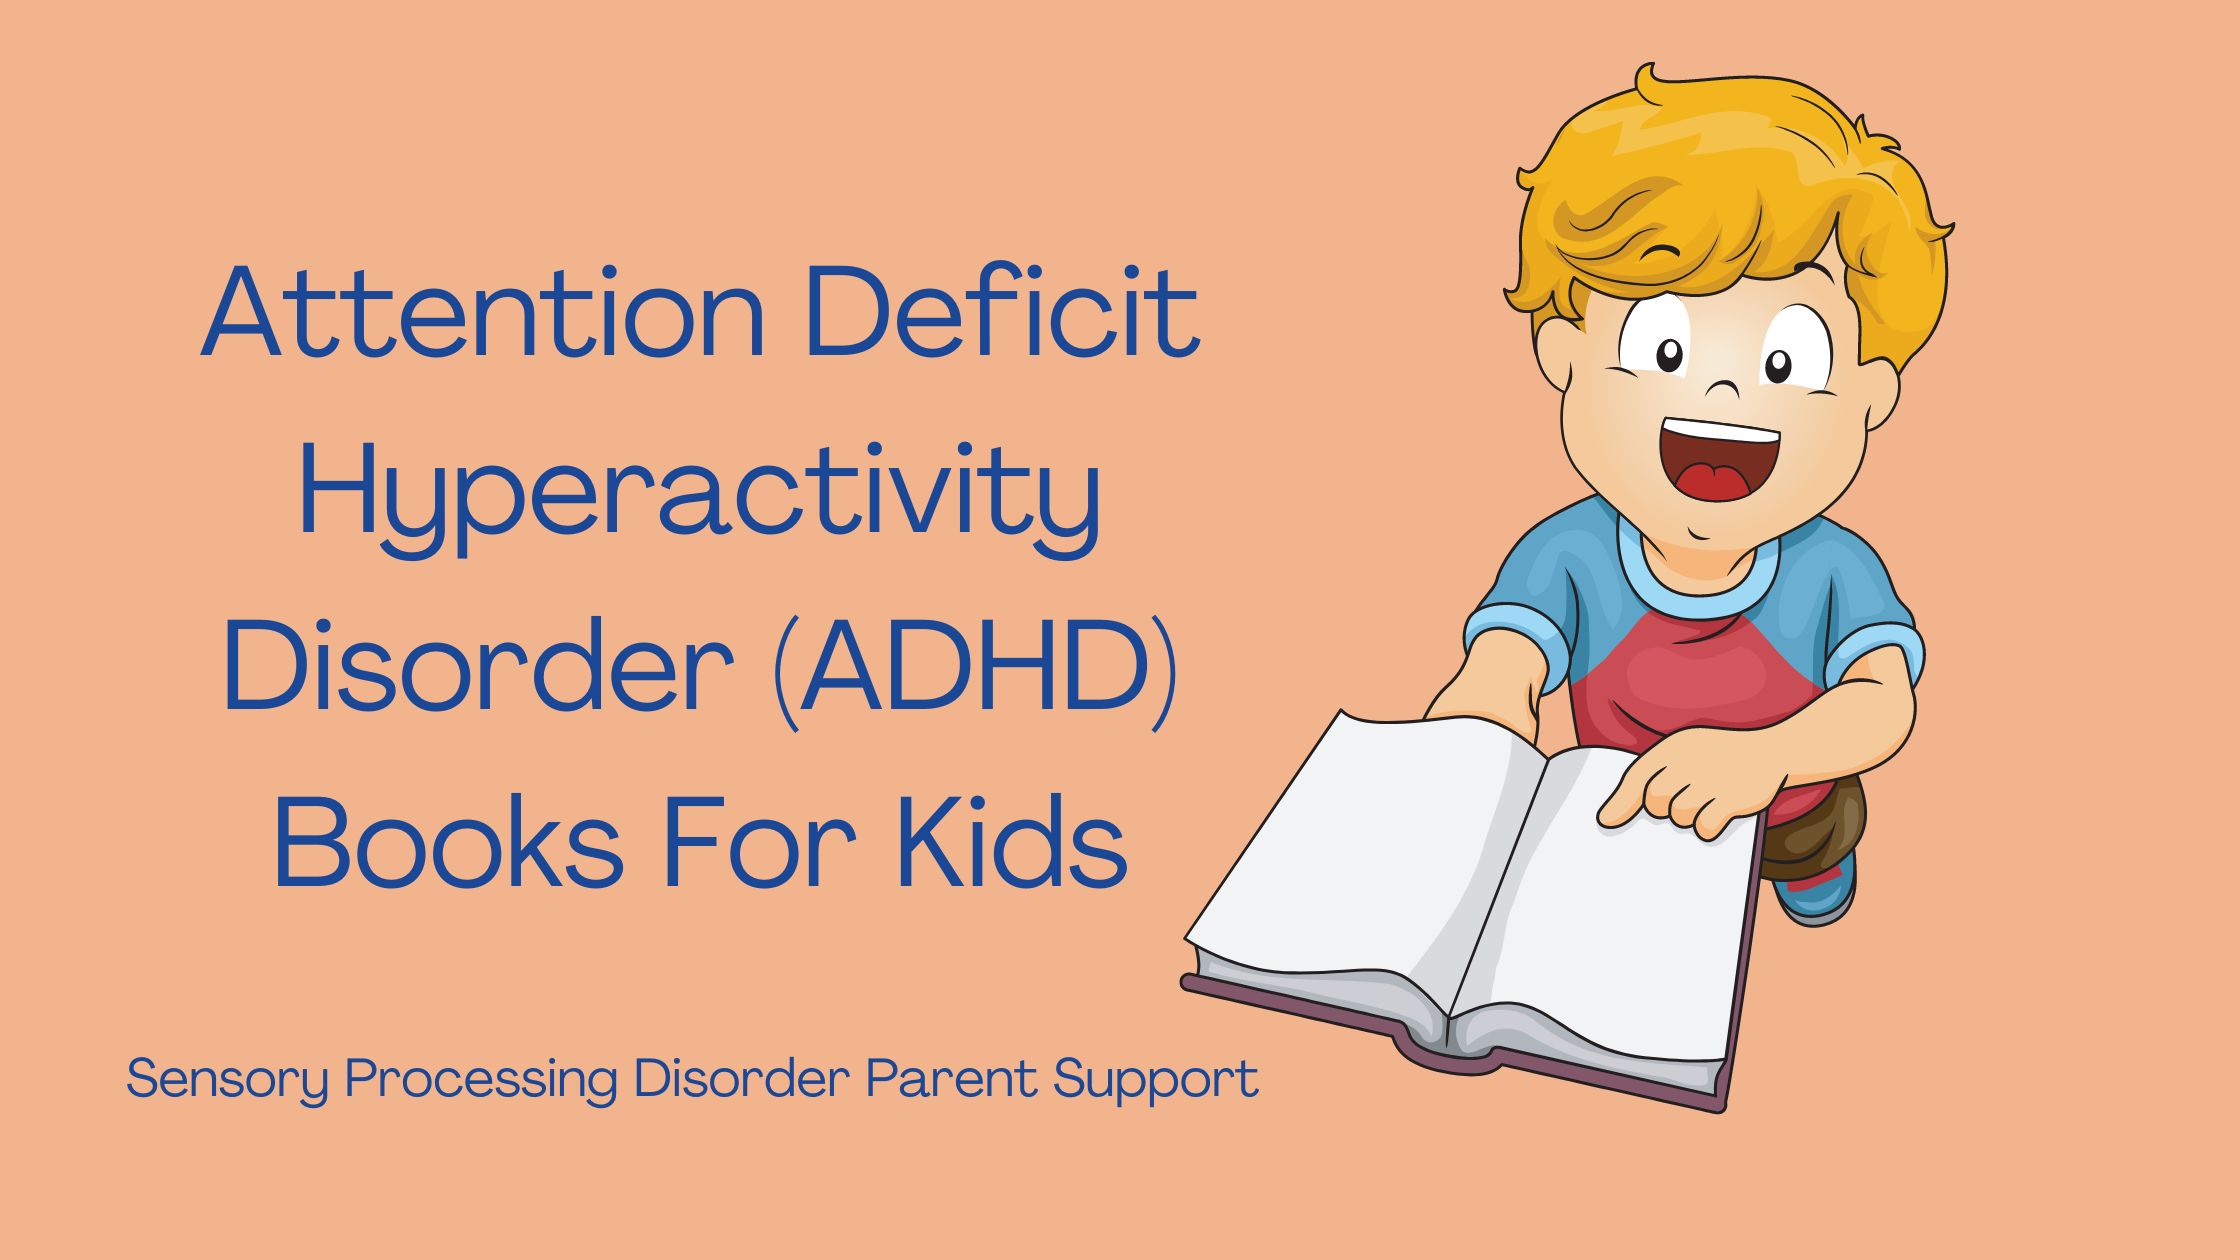 child with ADHD reading a book about ADHD Attention Deficit Hyperactivity Disorder (ADHD) Books For Kids